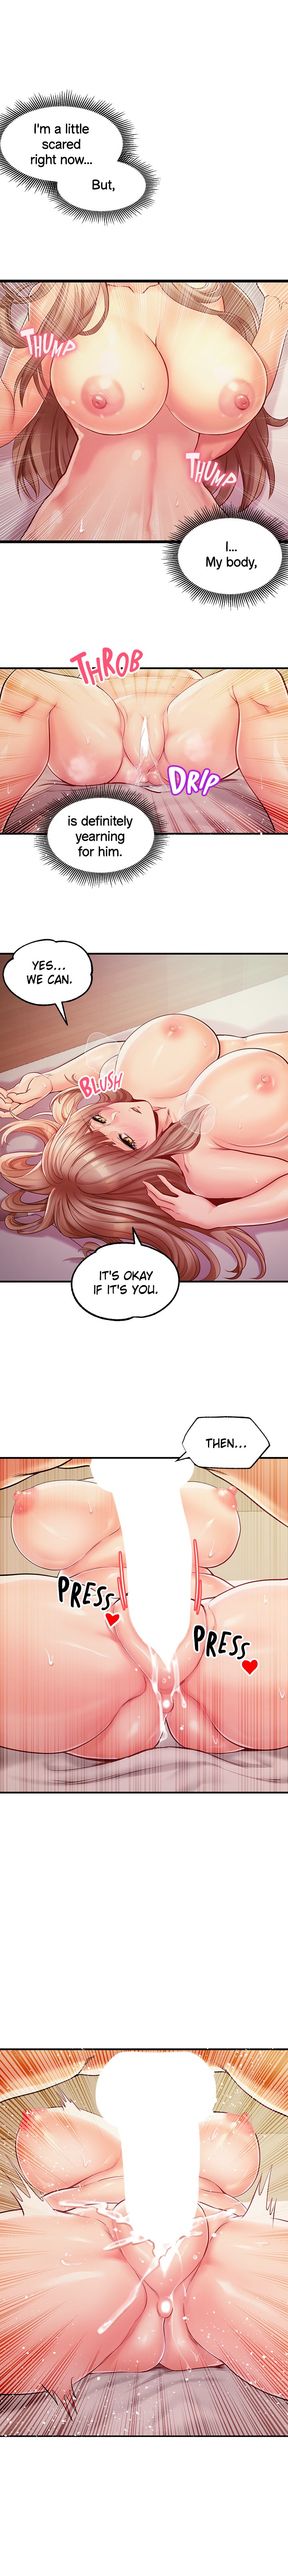 Phone Sex - Chapter 17 Page 1